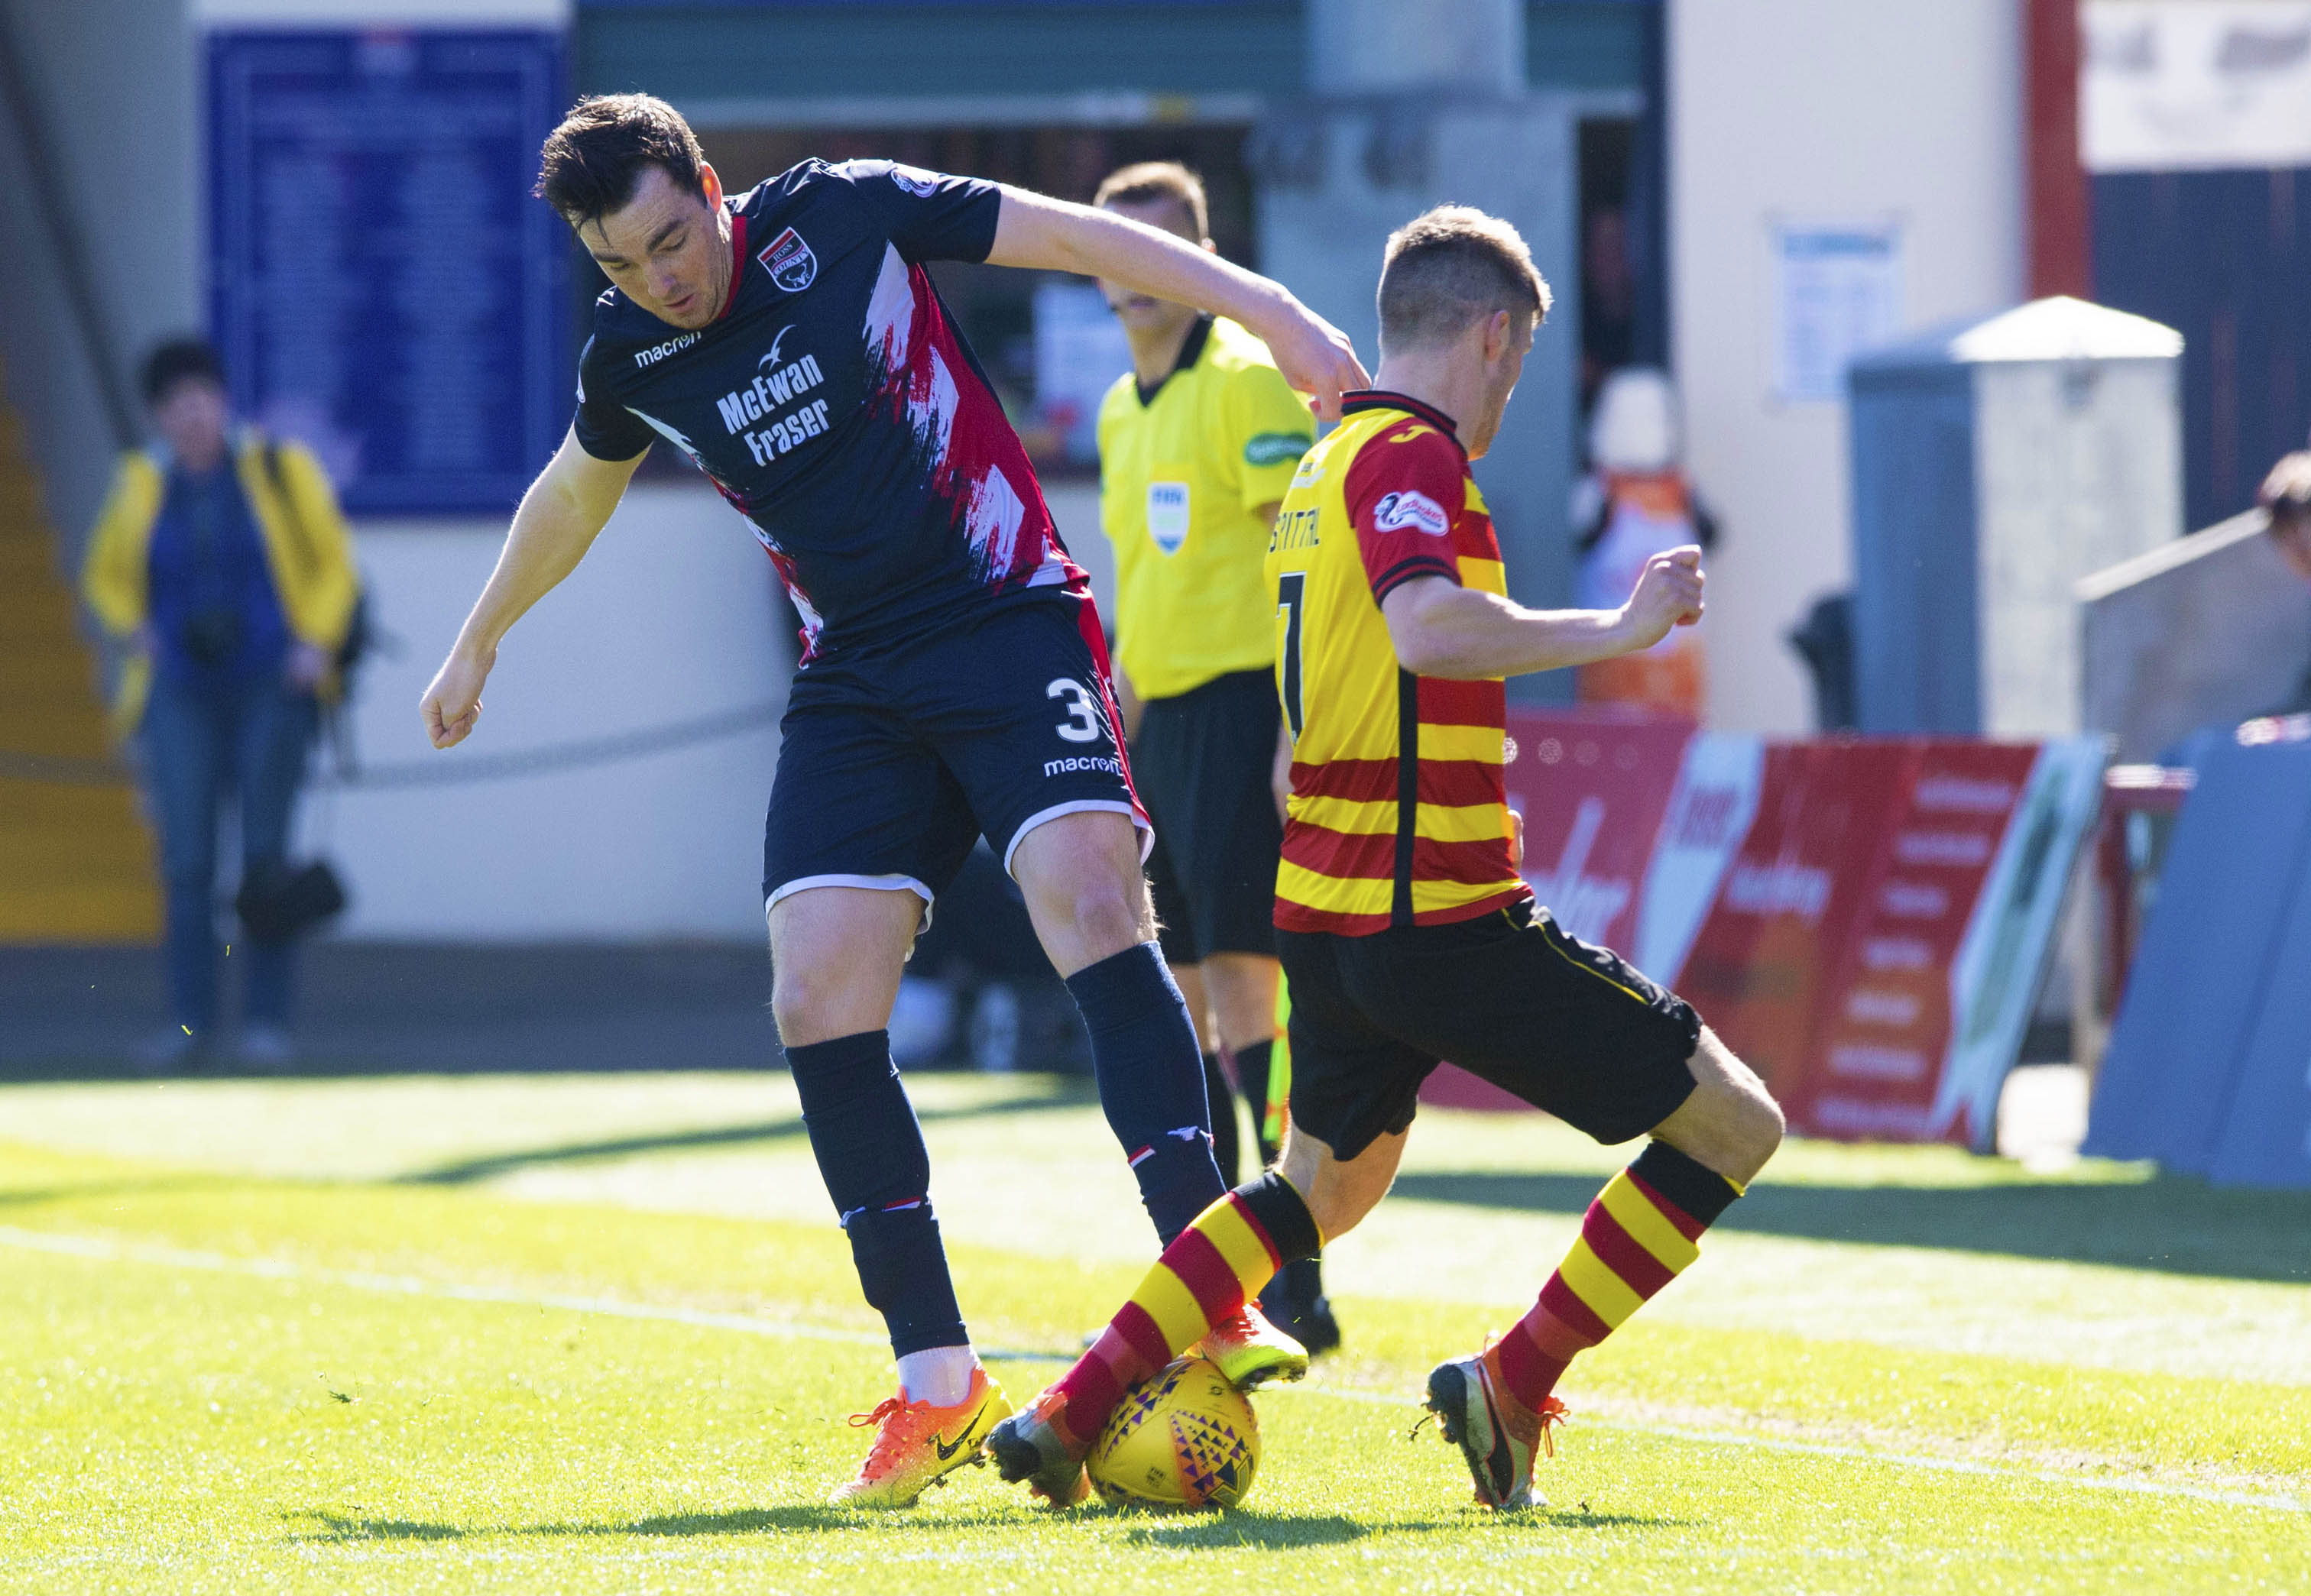 Ross County's Sean Kelly (L) competes with Partick Thistle's Blair Spittal, who has signed for County.